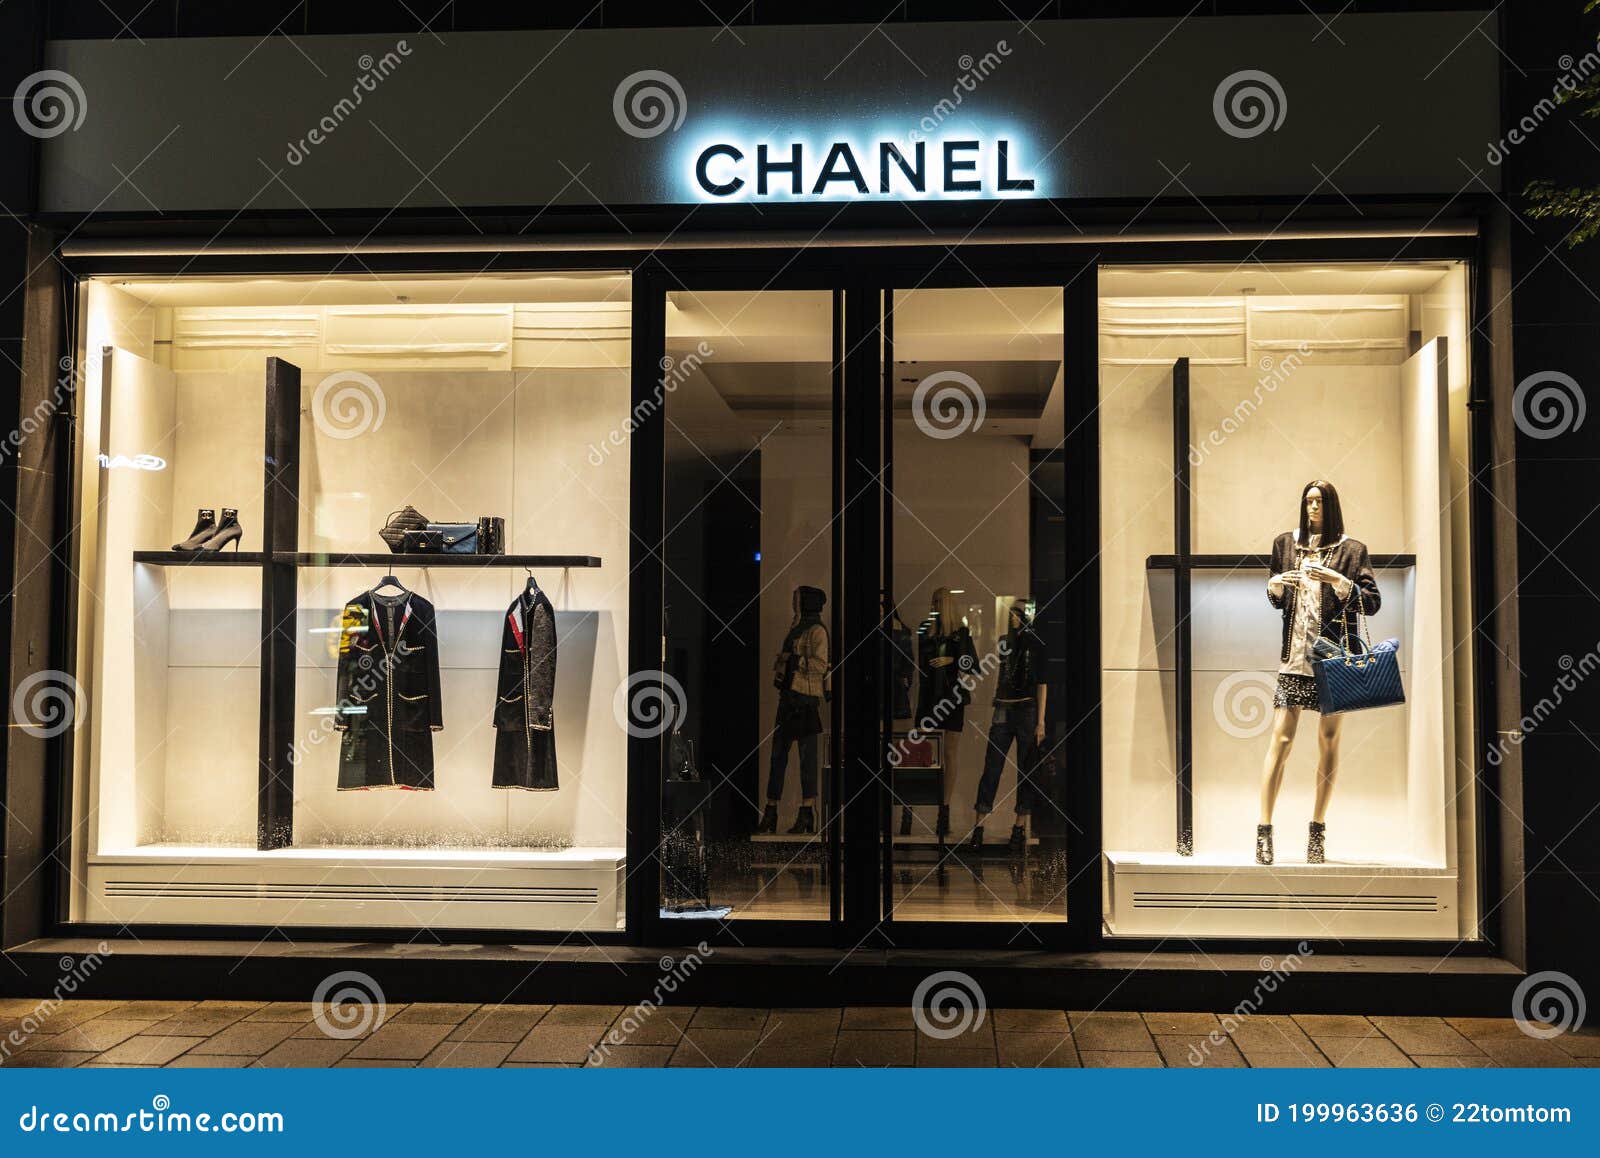 Chanel Luxury Clothing Store at Night in Hamburg, Germany